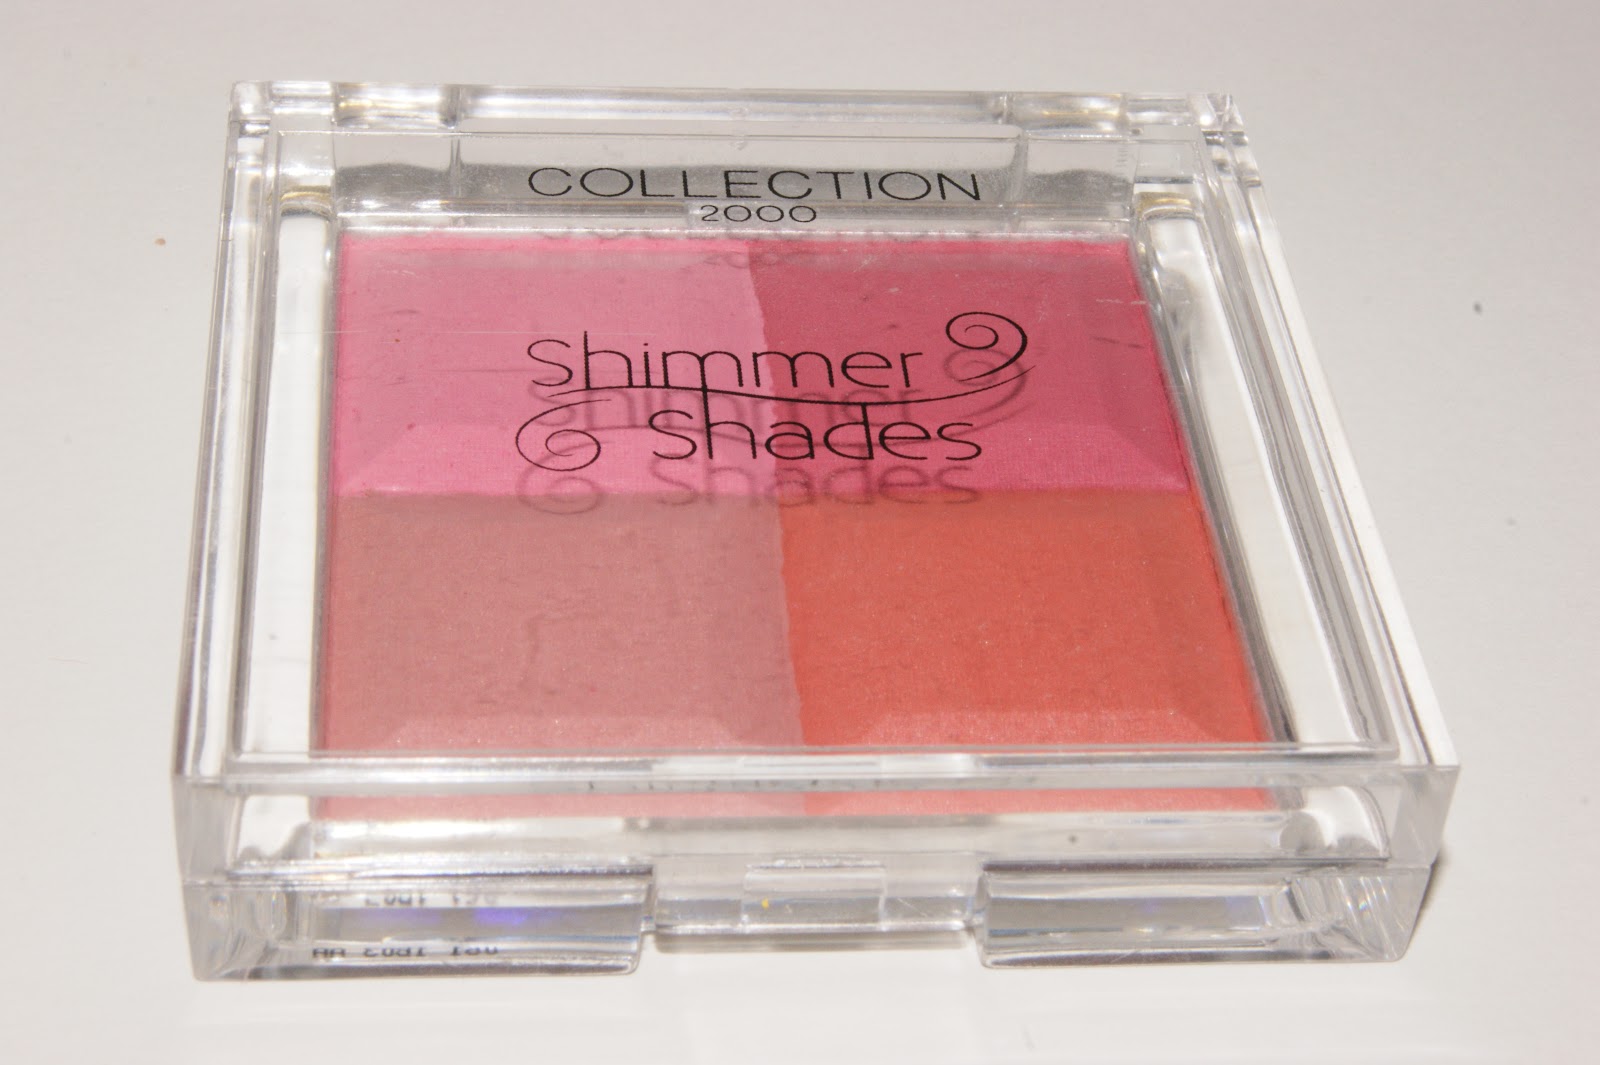 Collection 2000 Shimmer Shades Blush in Blushalicious - Review